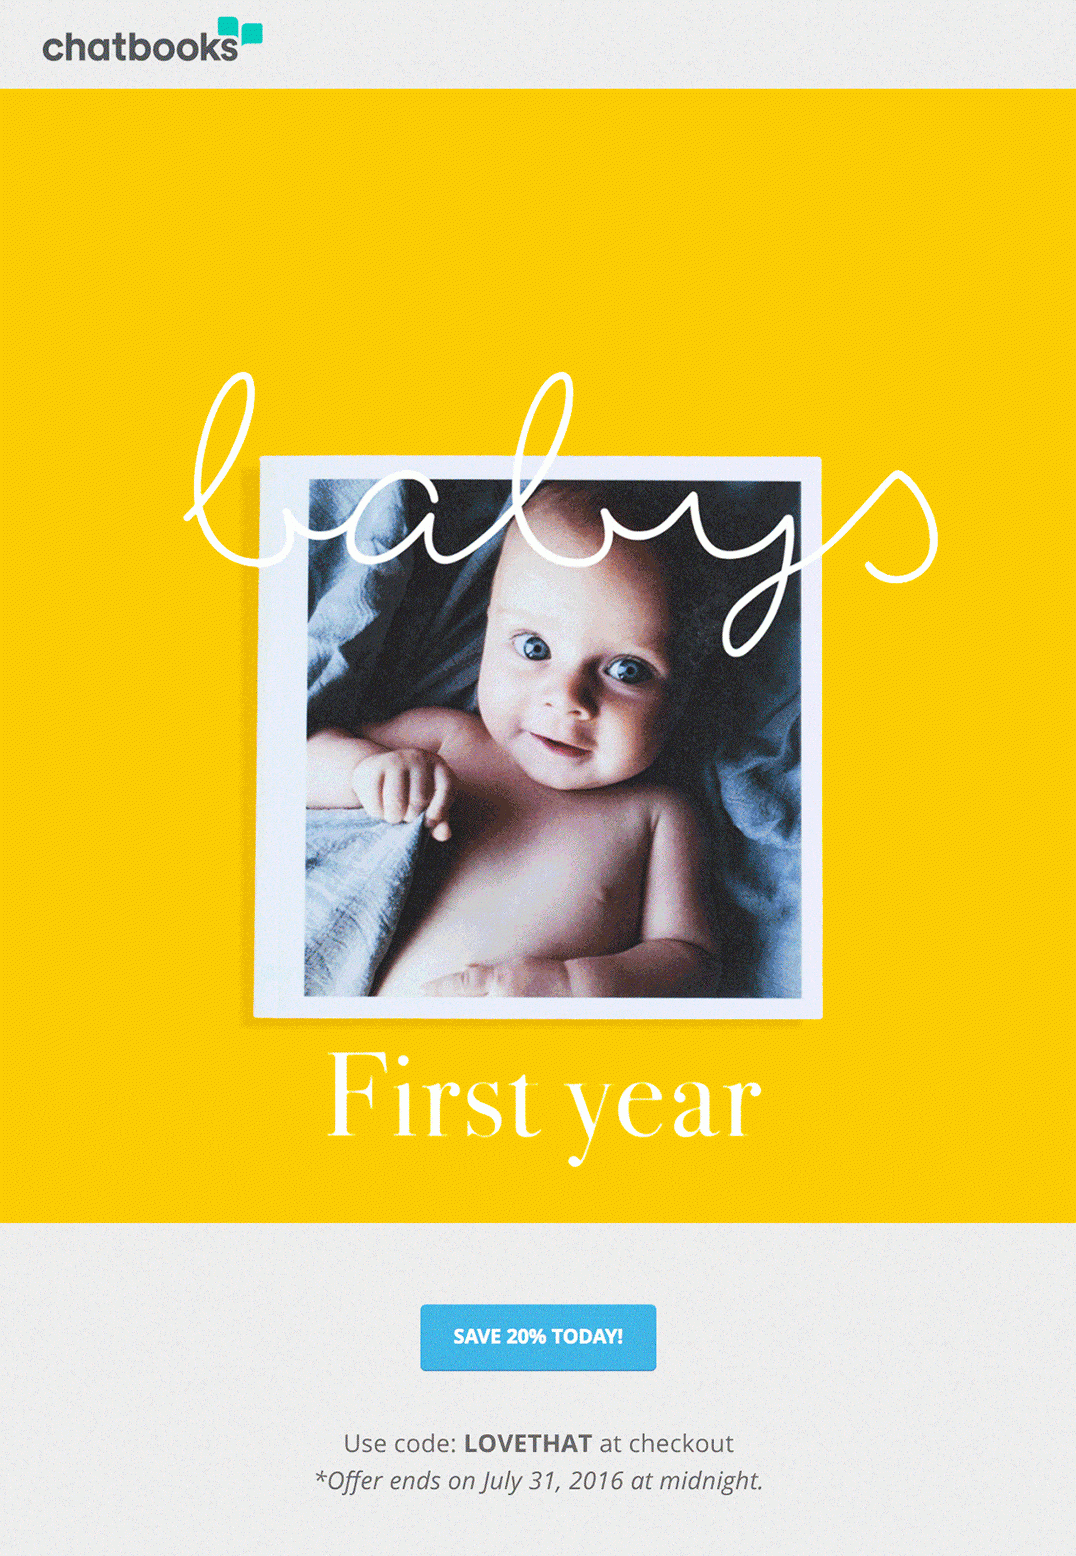 Improve your email copy by making the content personalized. This Chatbooks email example shows a personalized image of a baby.